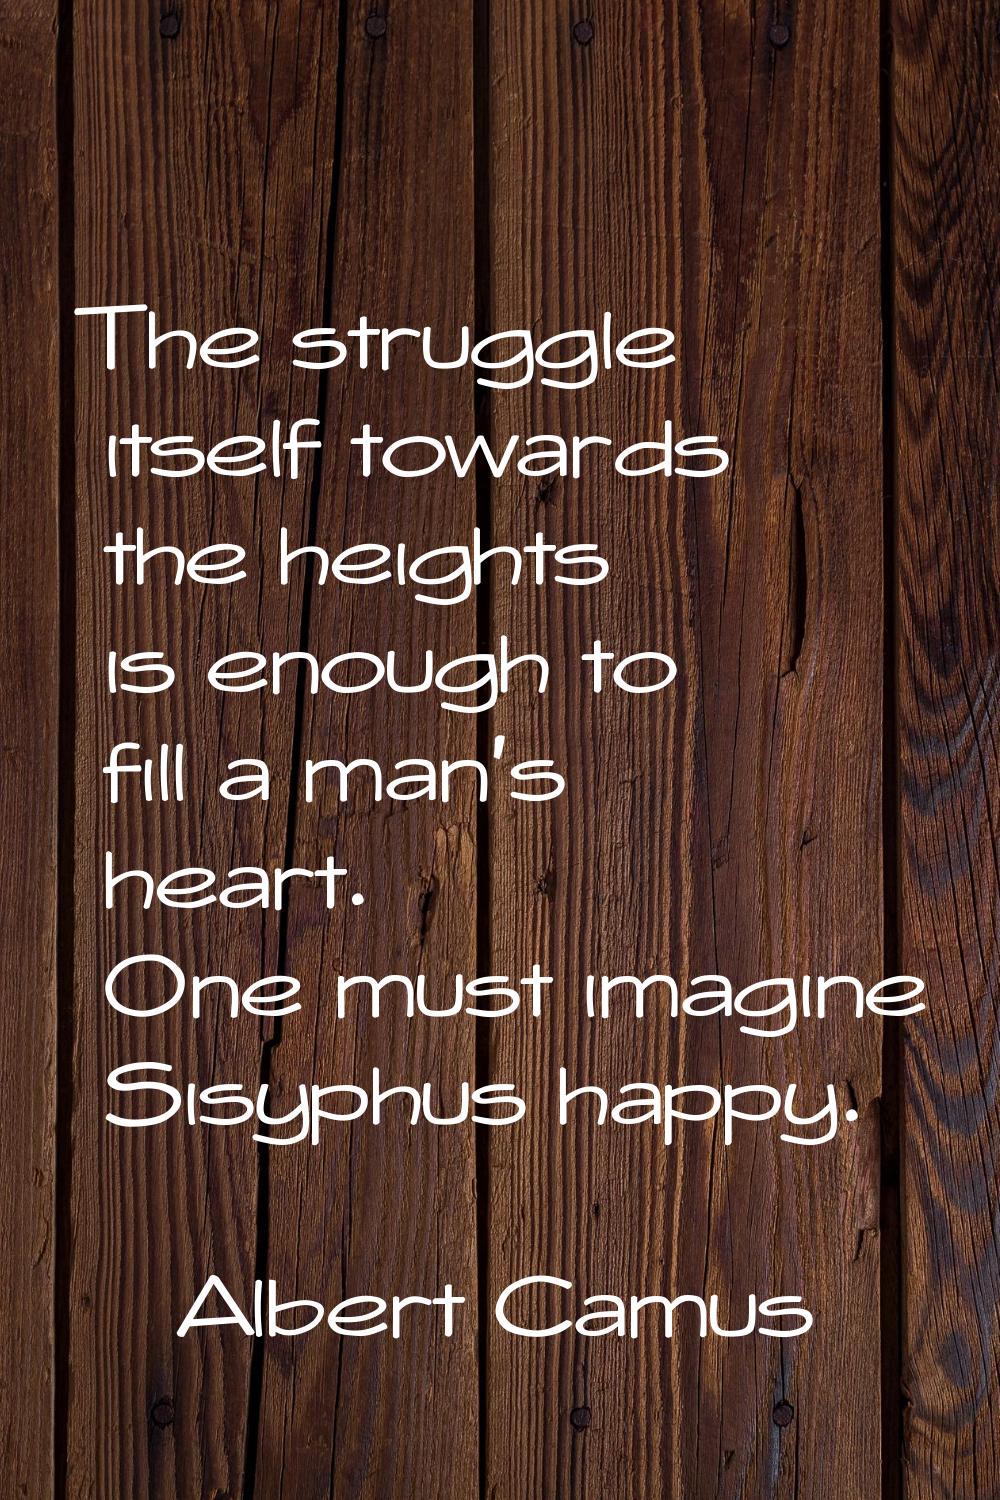 The struggle itself towards the heights is enough to fill a man's heart. One must imagine Sisyphus 